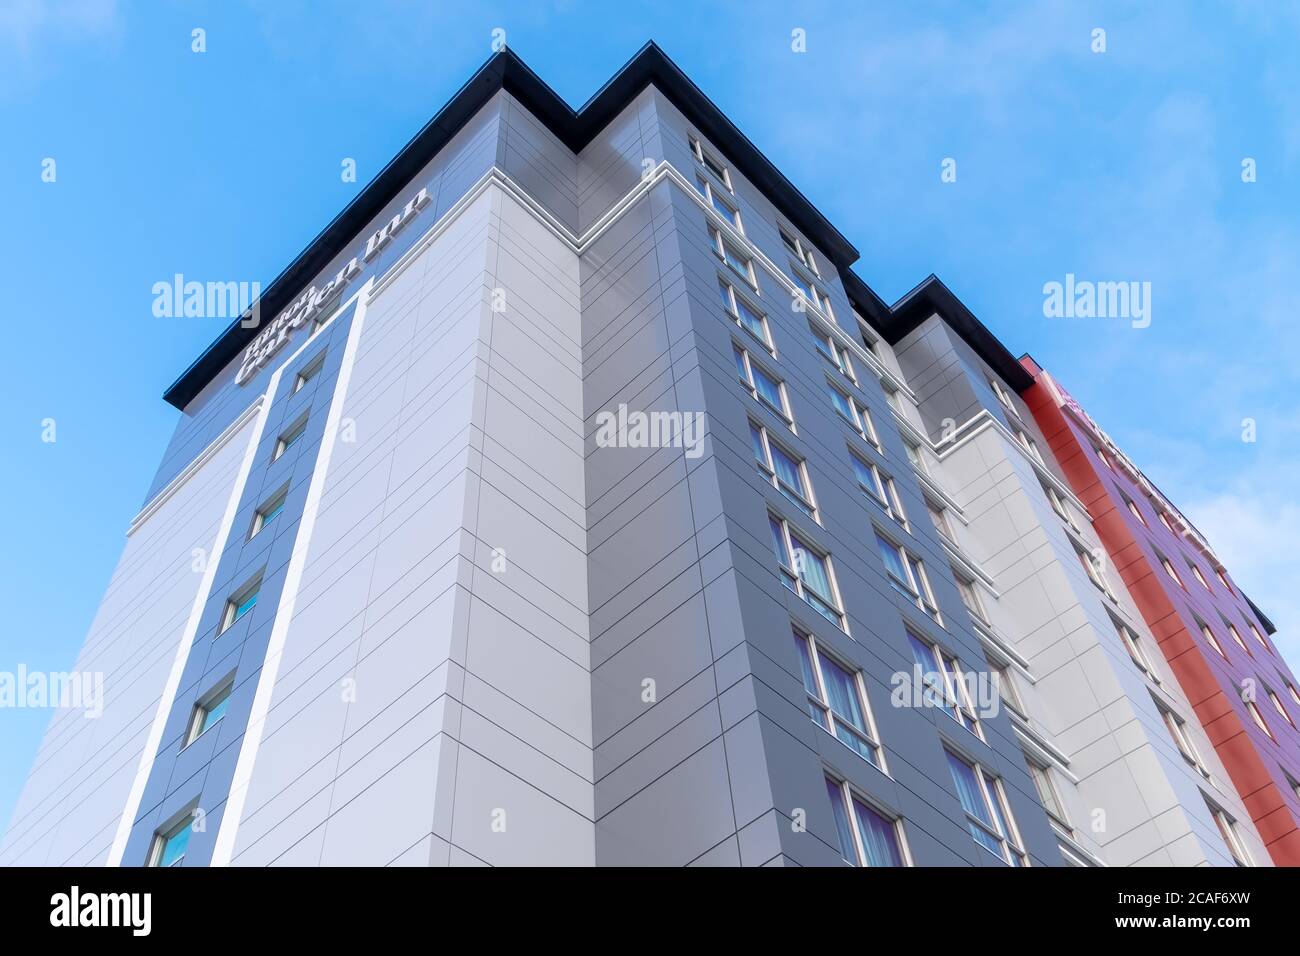 St. John's, Newfoundland / Canada - August 2020: Hilton Garden Inn hotel, a newly constructed, tall building with metal composite panels in grey color. Stock Photo